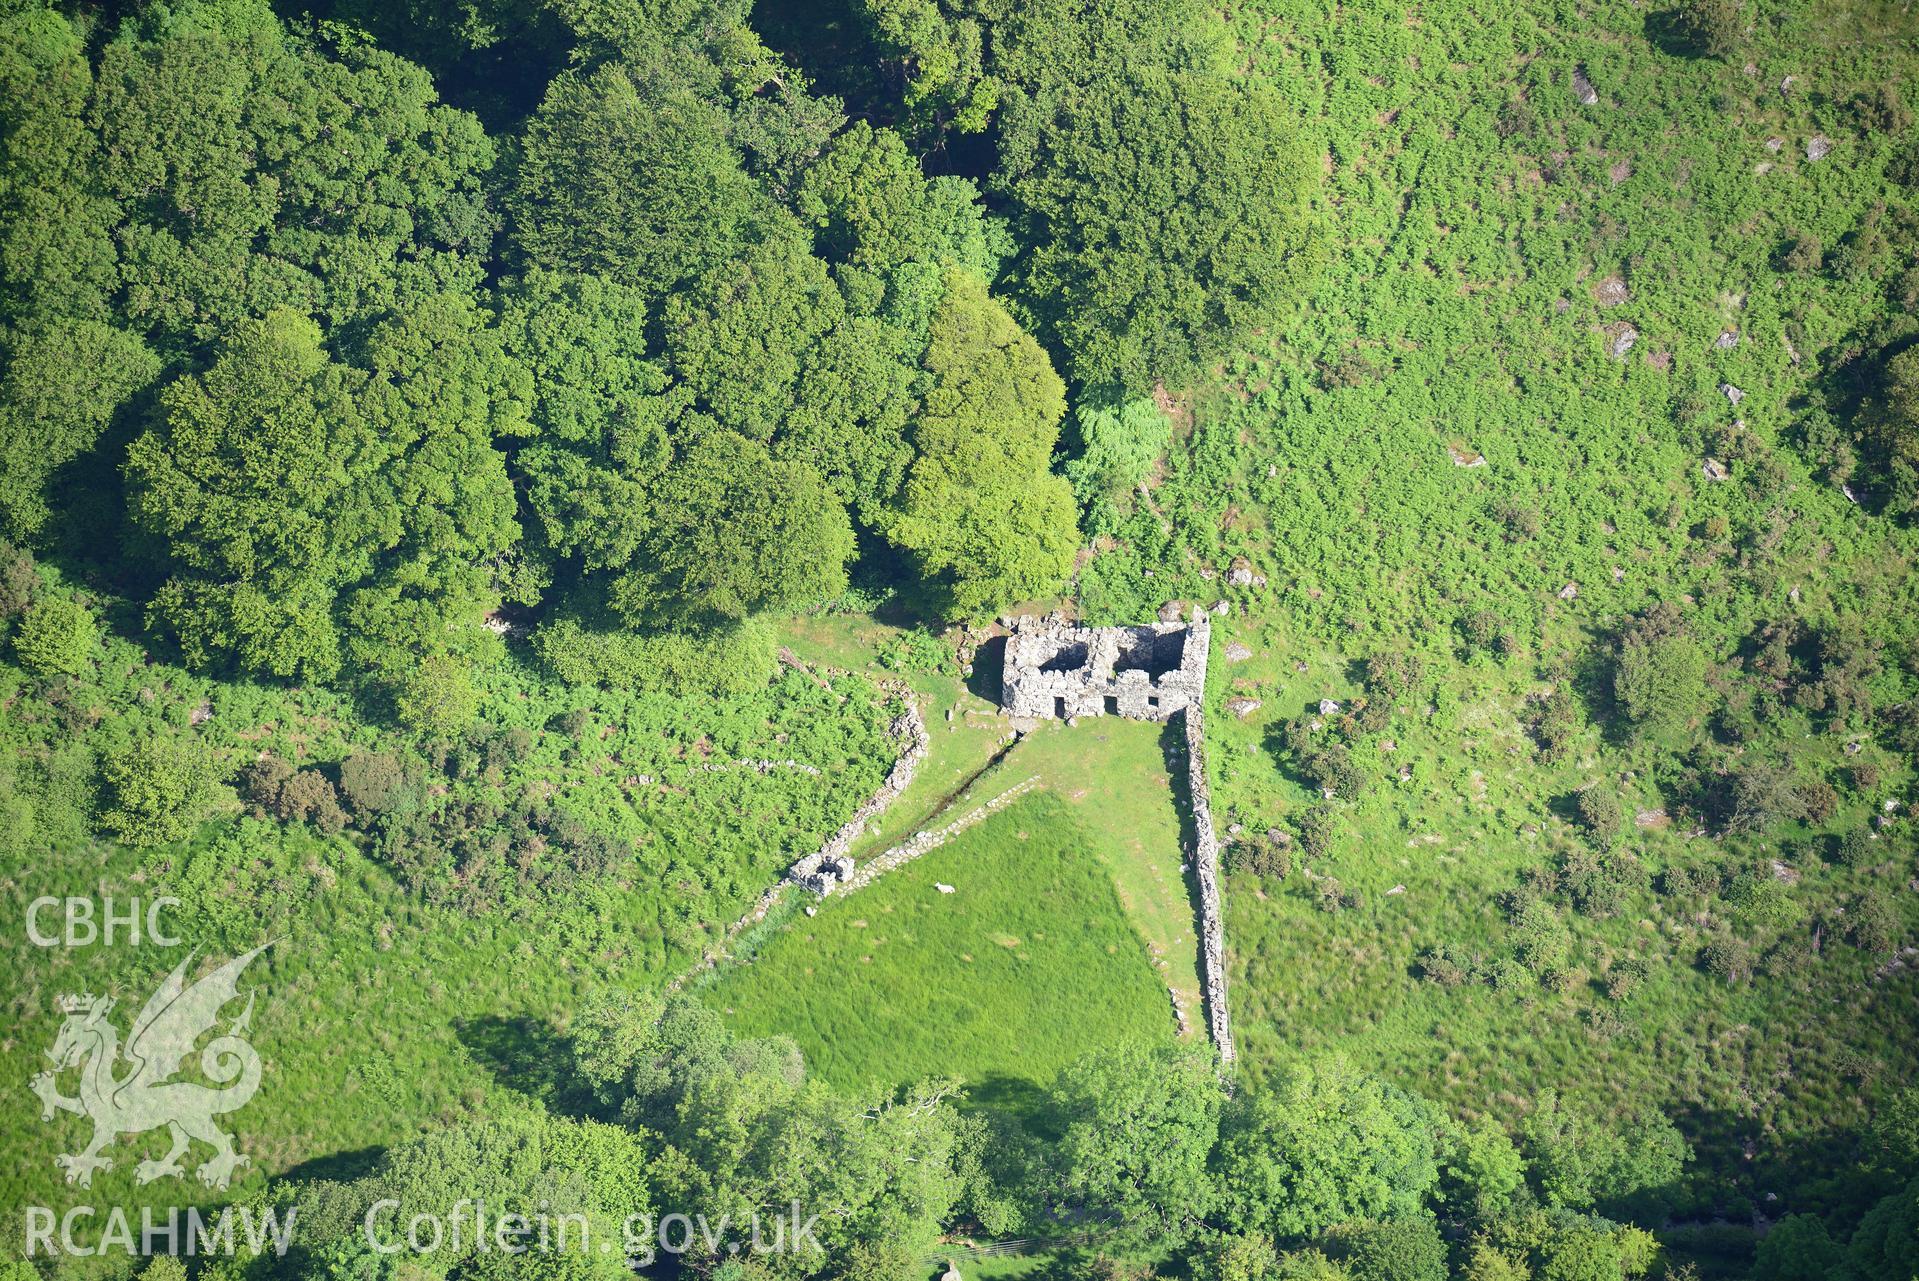 Ffynnon Gybi holy well, near Llanystumdwy. Oblique aerial photograph taken during the Royal Commission's programme of archaeological aerial reconnaissance by Toby Driver on 23rd June 2015.